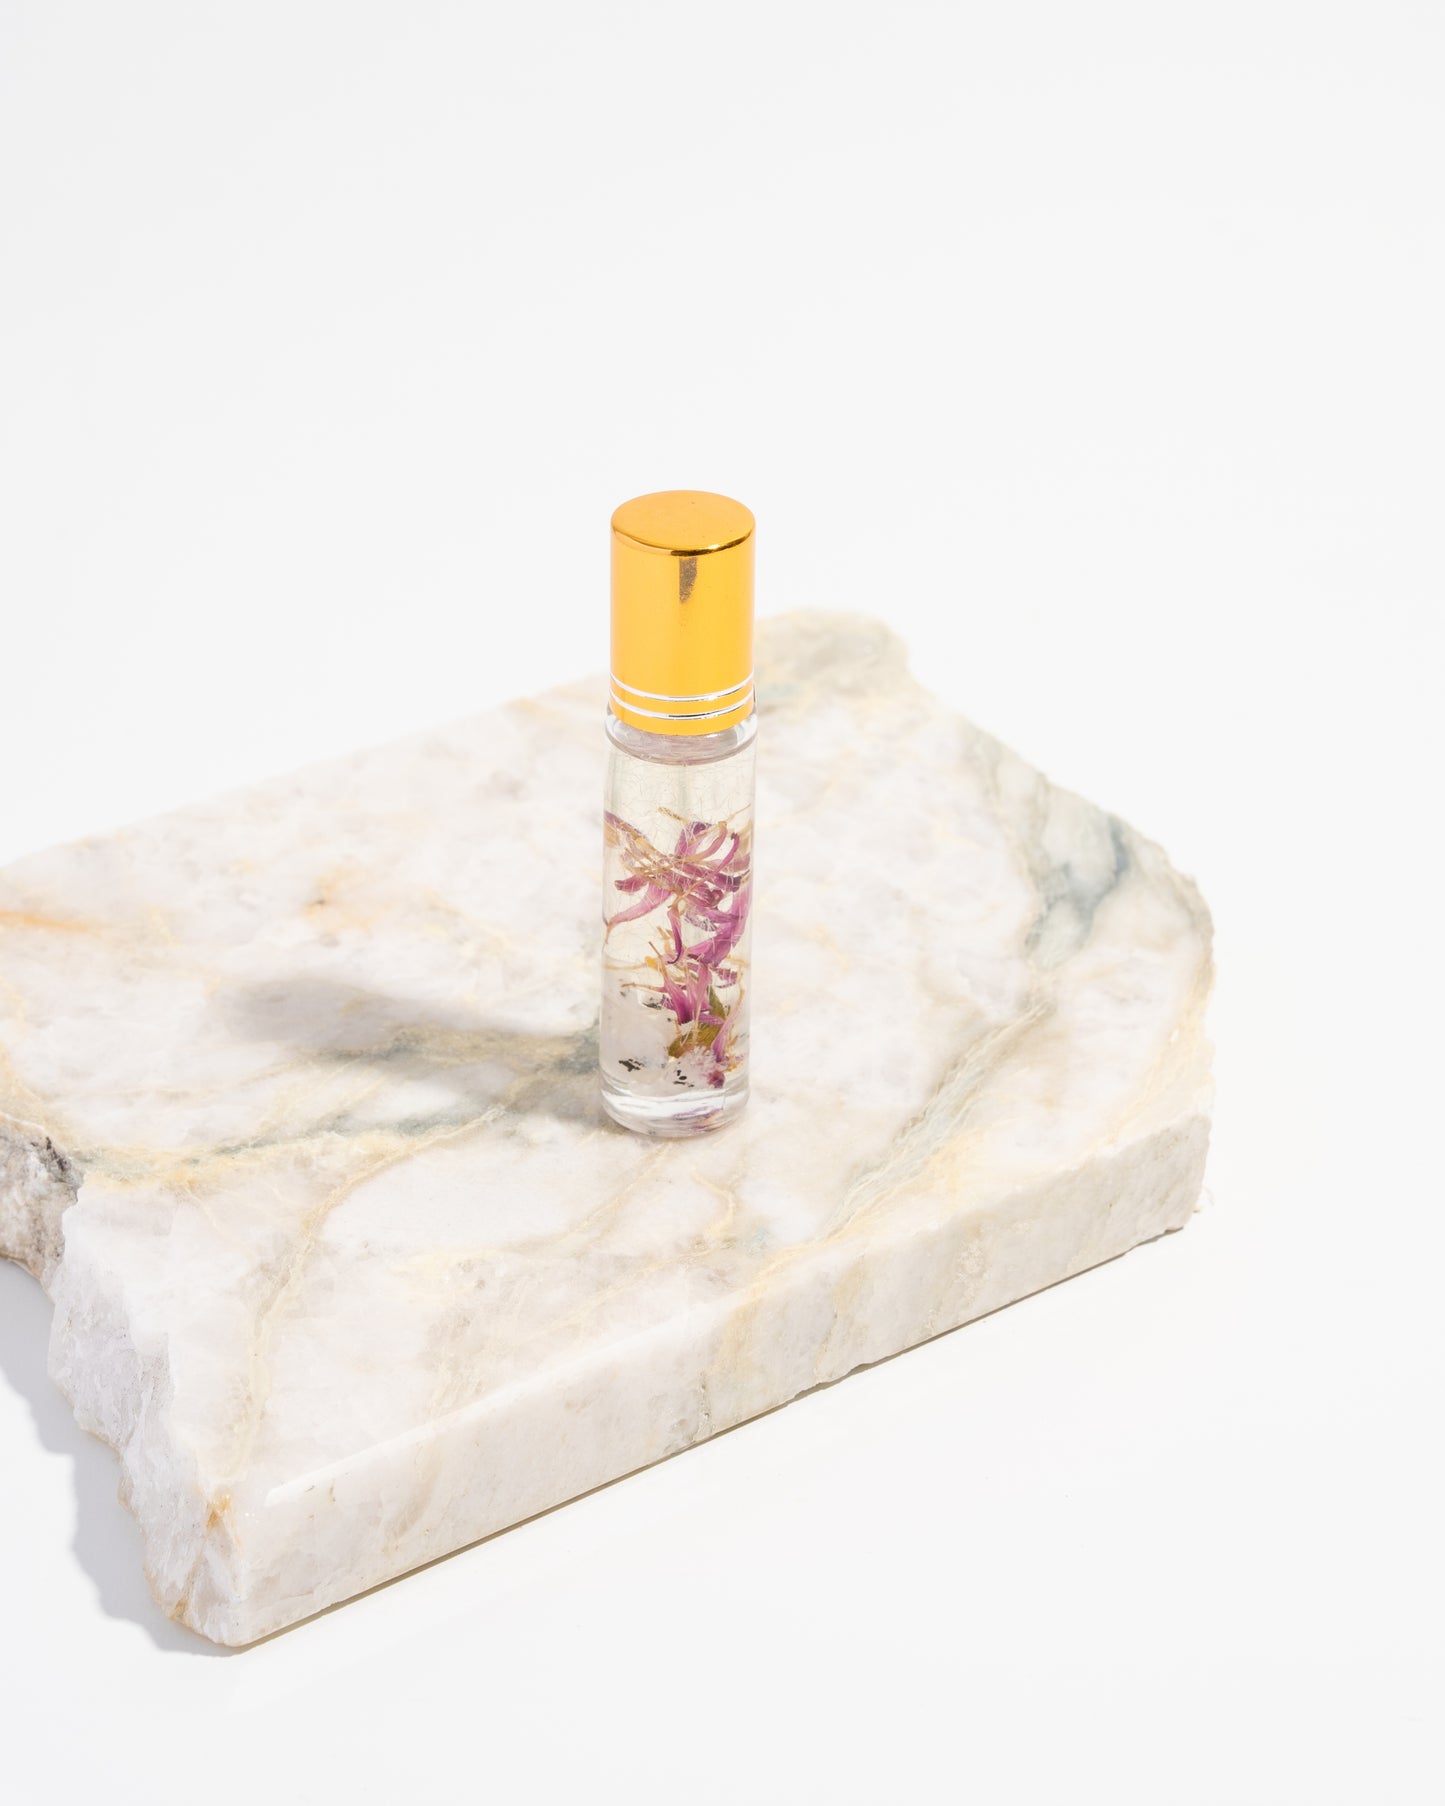 Imagine fragrance potion | creativity, lucid dream, and imagination attracting oil roller with dried florals , crystals, and essential oils